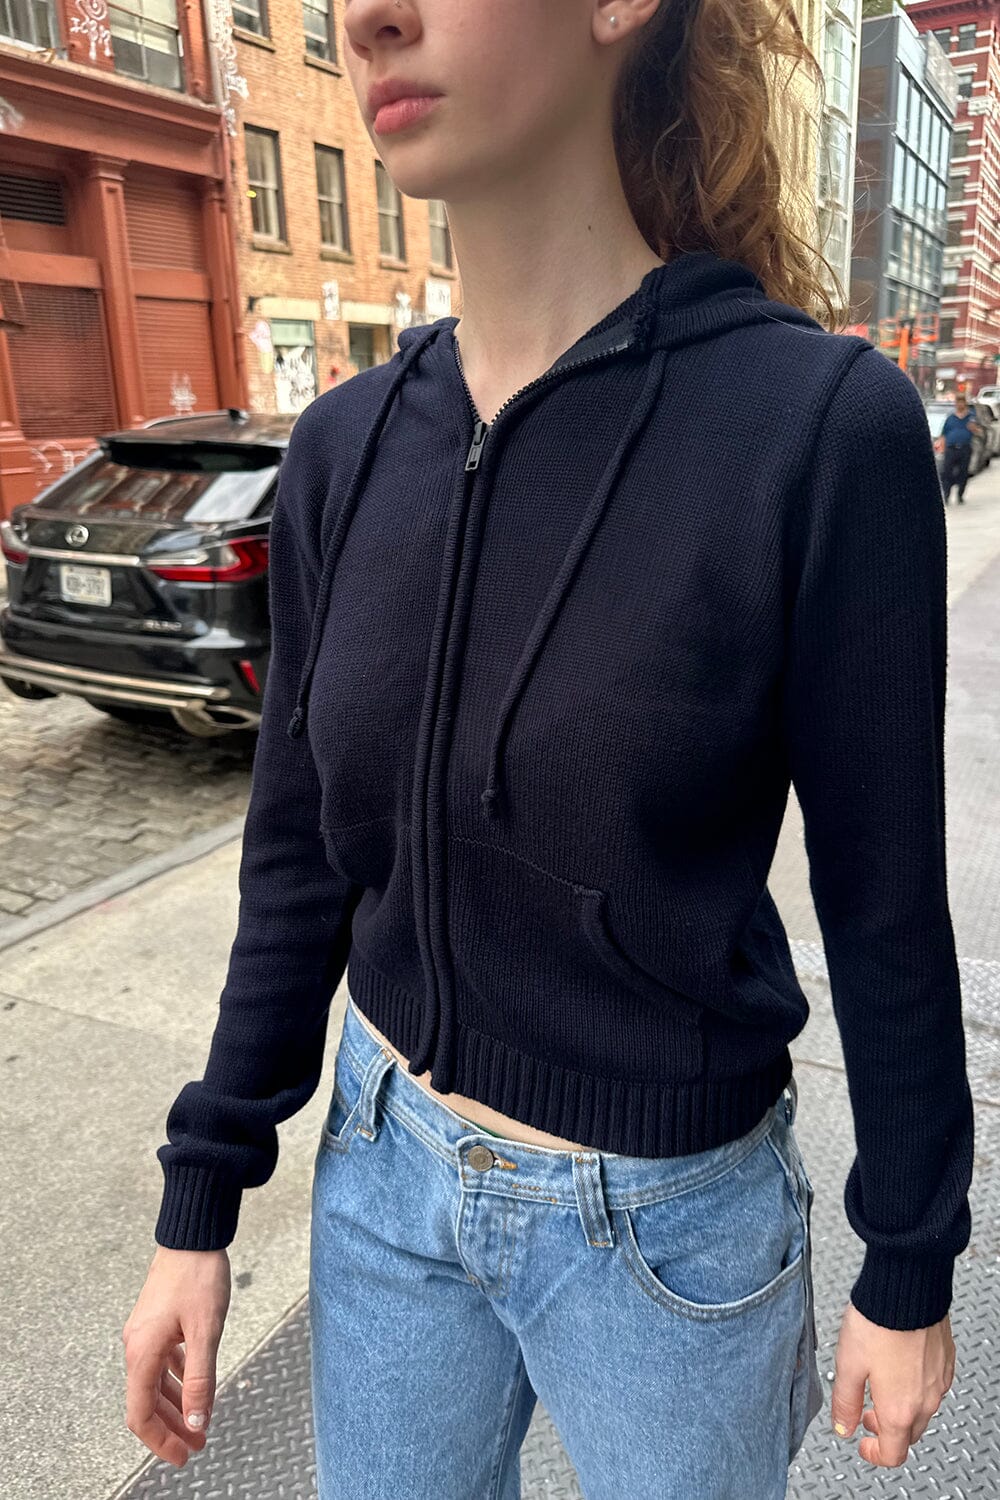 Brandy Melville Ayla Cable Knit Zip Up Tan - $45 New With Tags